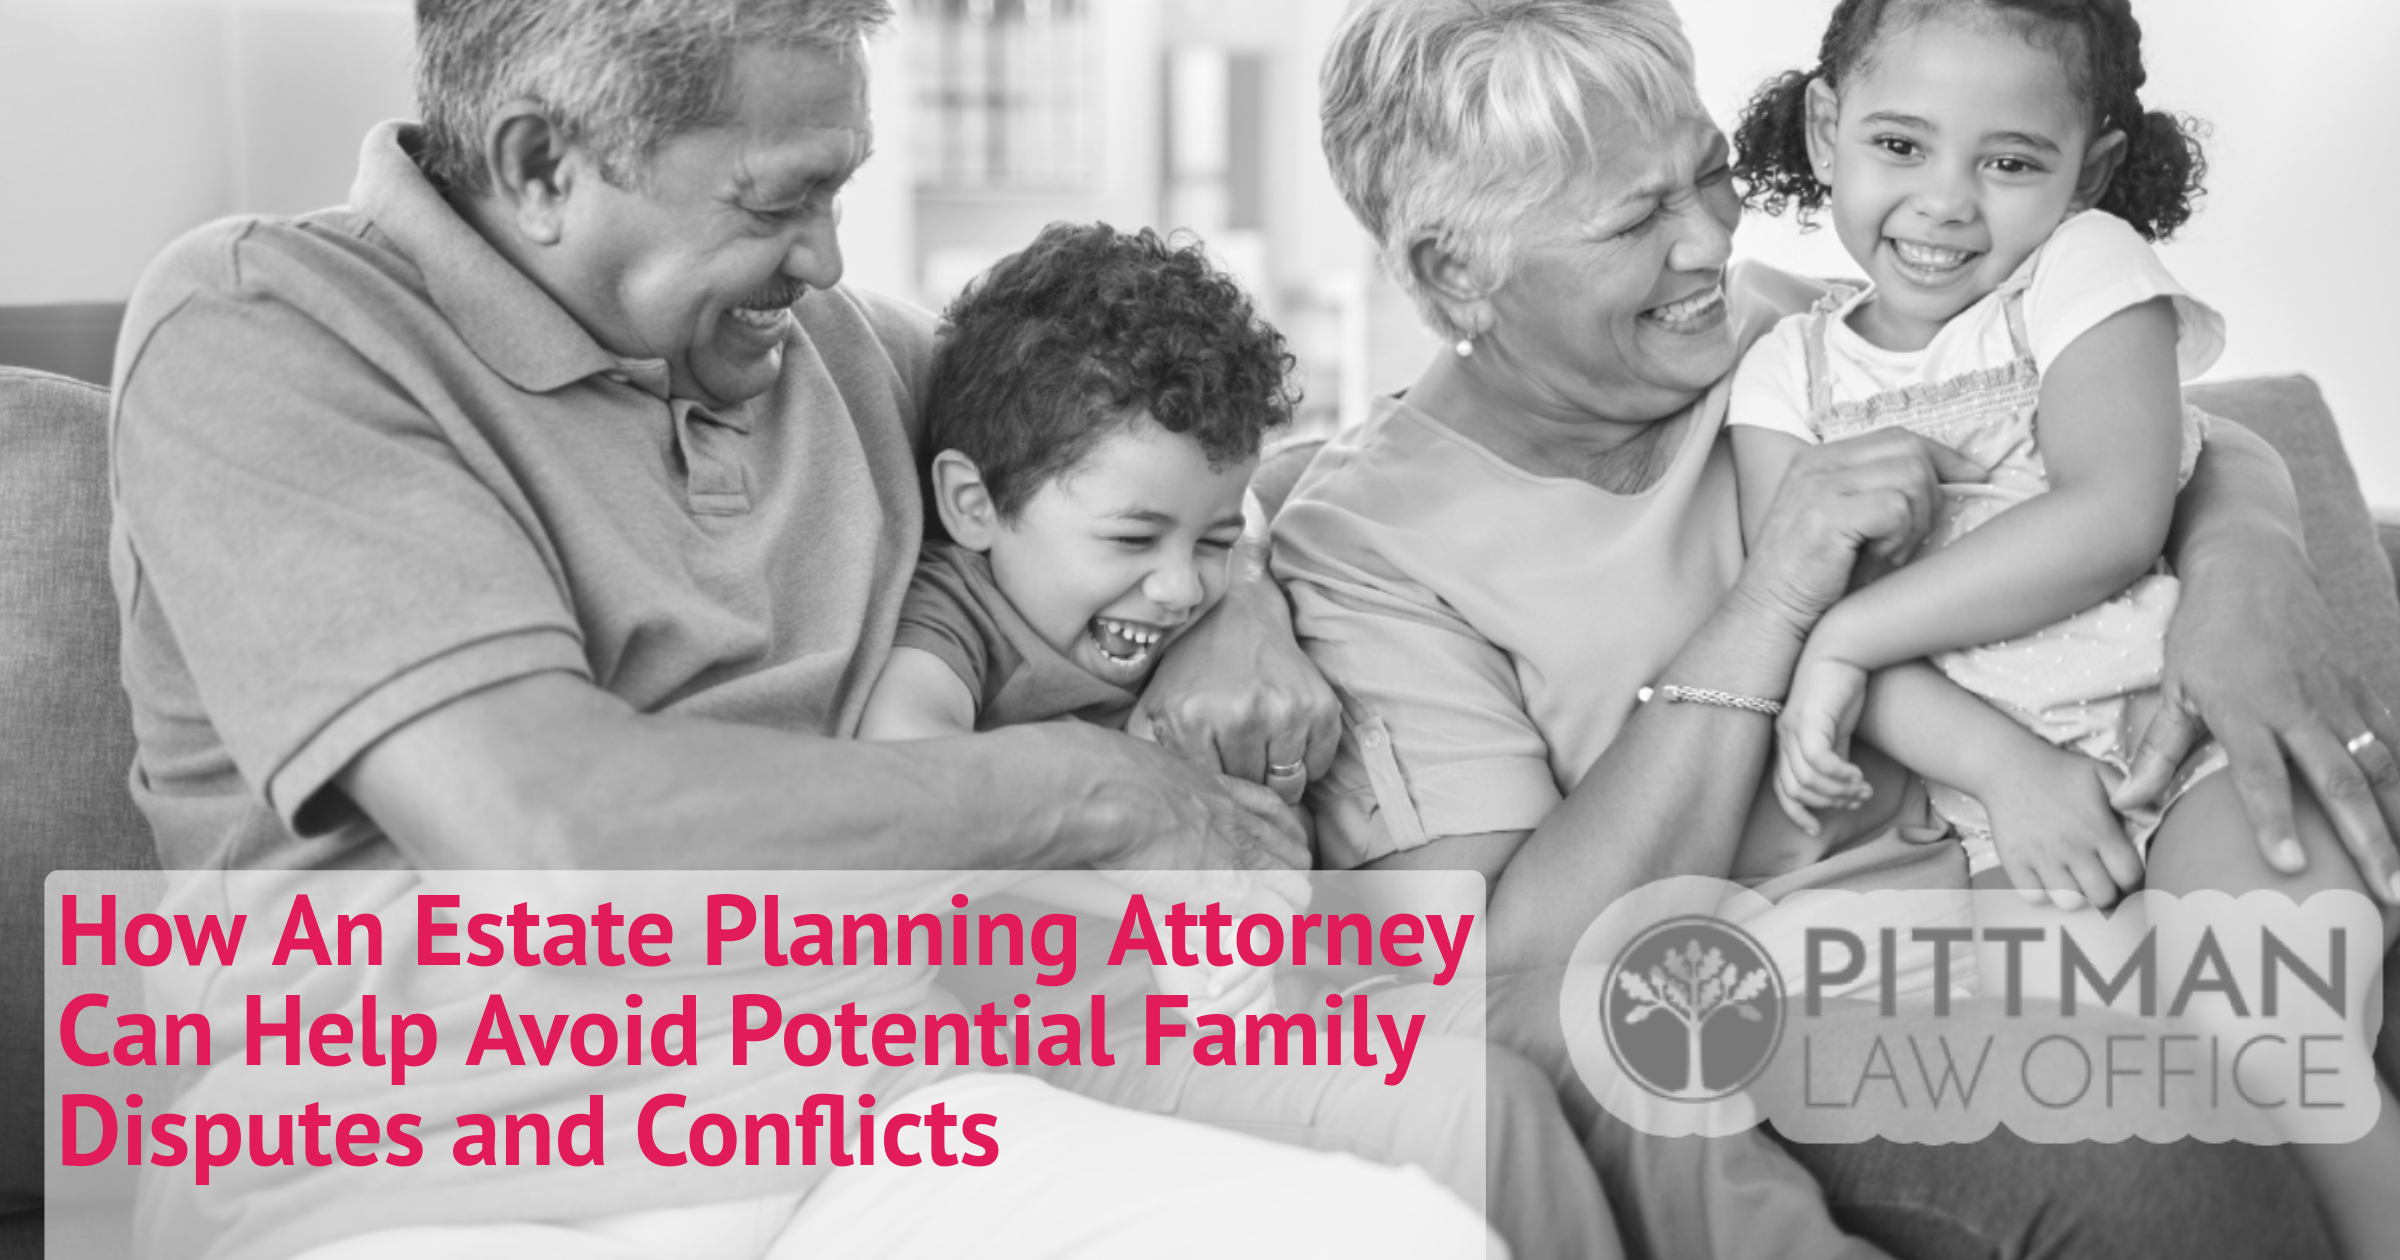 How An Estate Planning Attorney Can Help